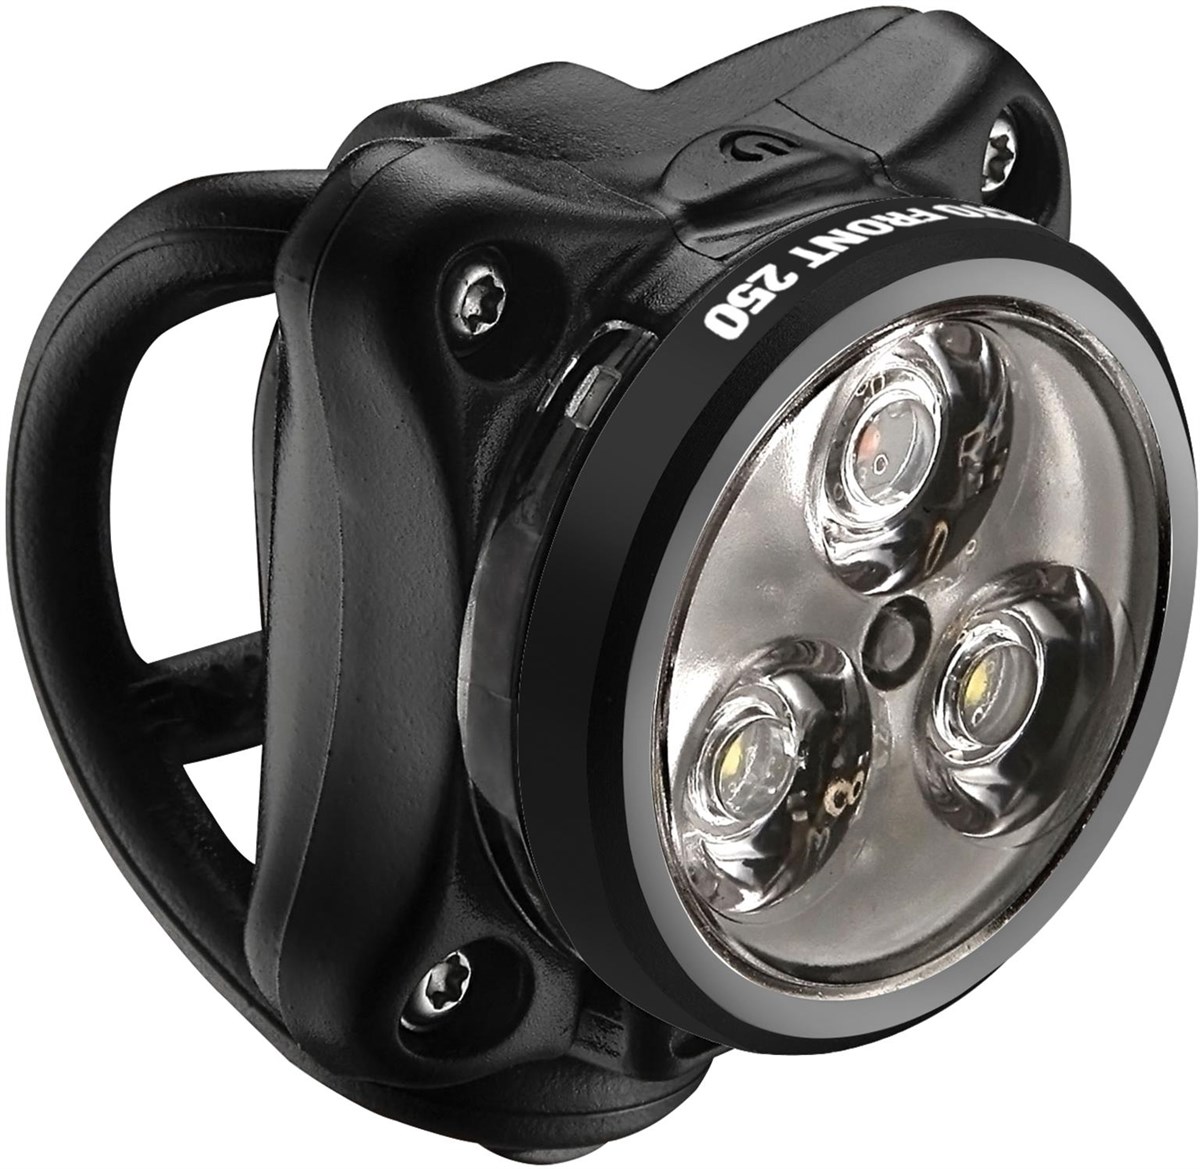 Lezyne Zecto Drive 250 USB Rechargeable Front Light product image